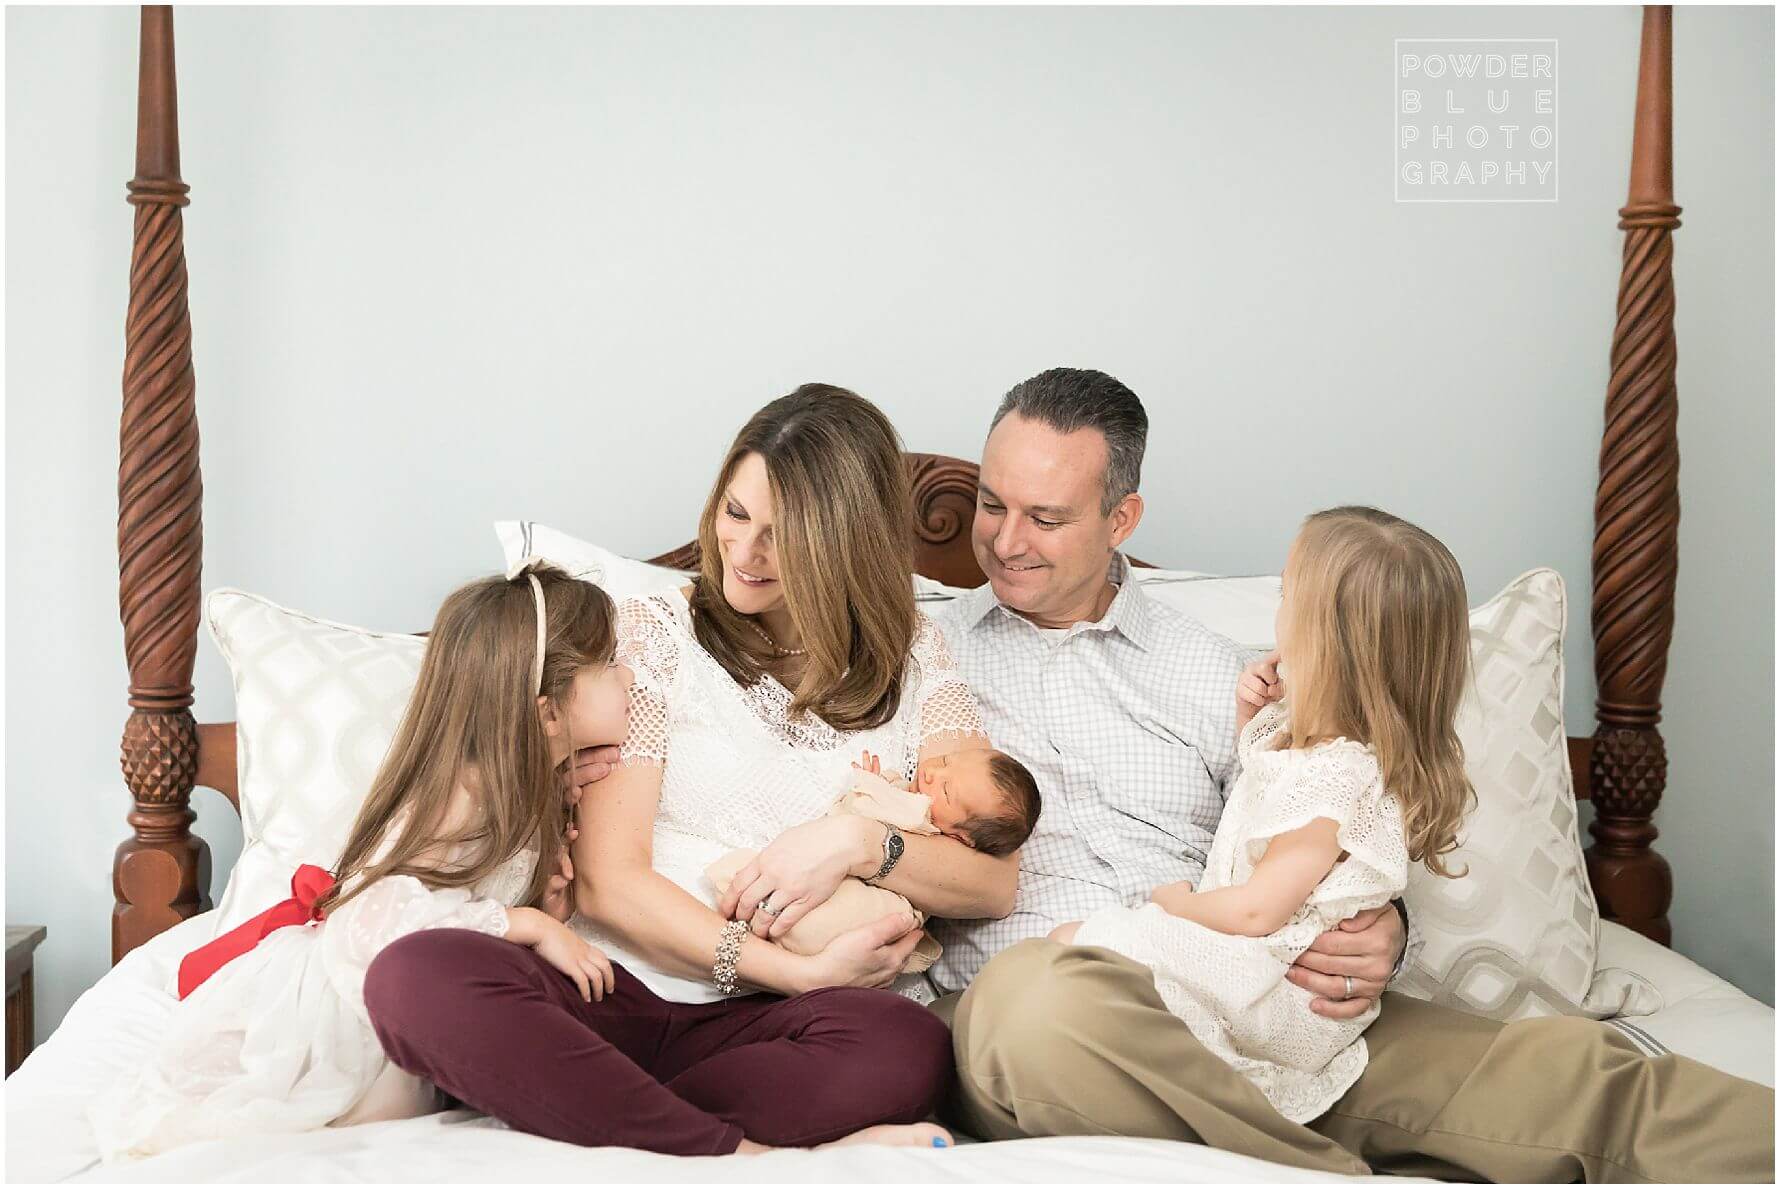 lifestyle newborn photographer missy timko photographed this family of five enjoying their newborn baby boy.